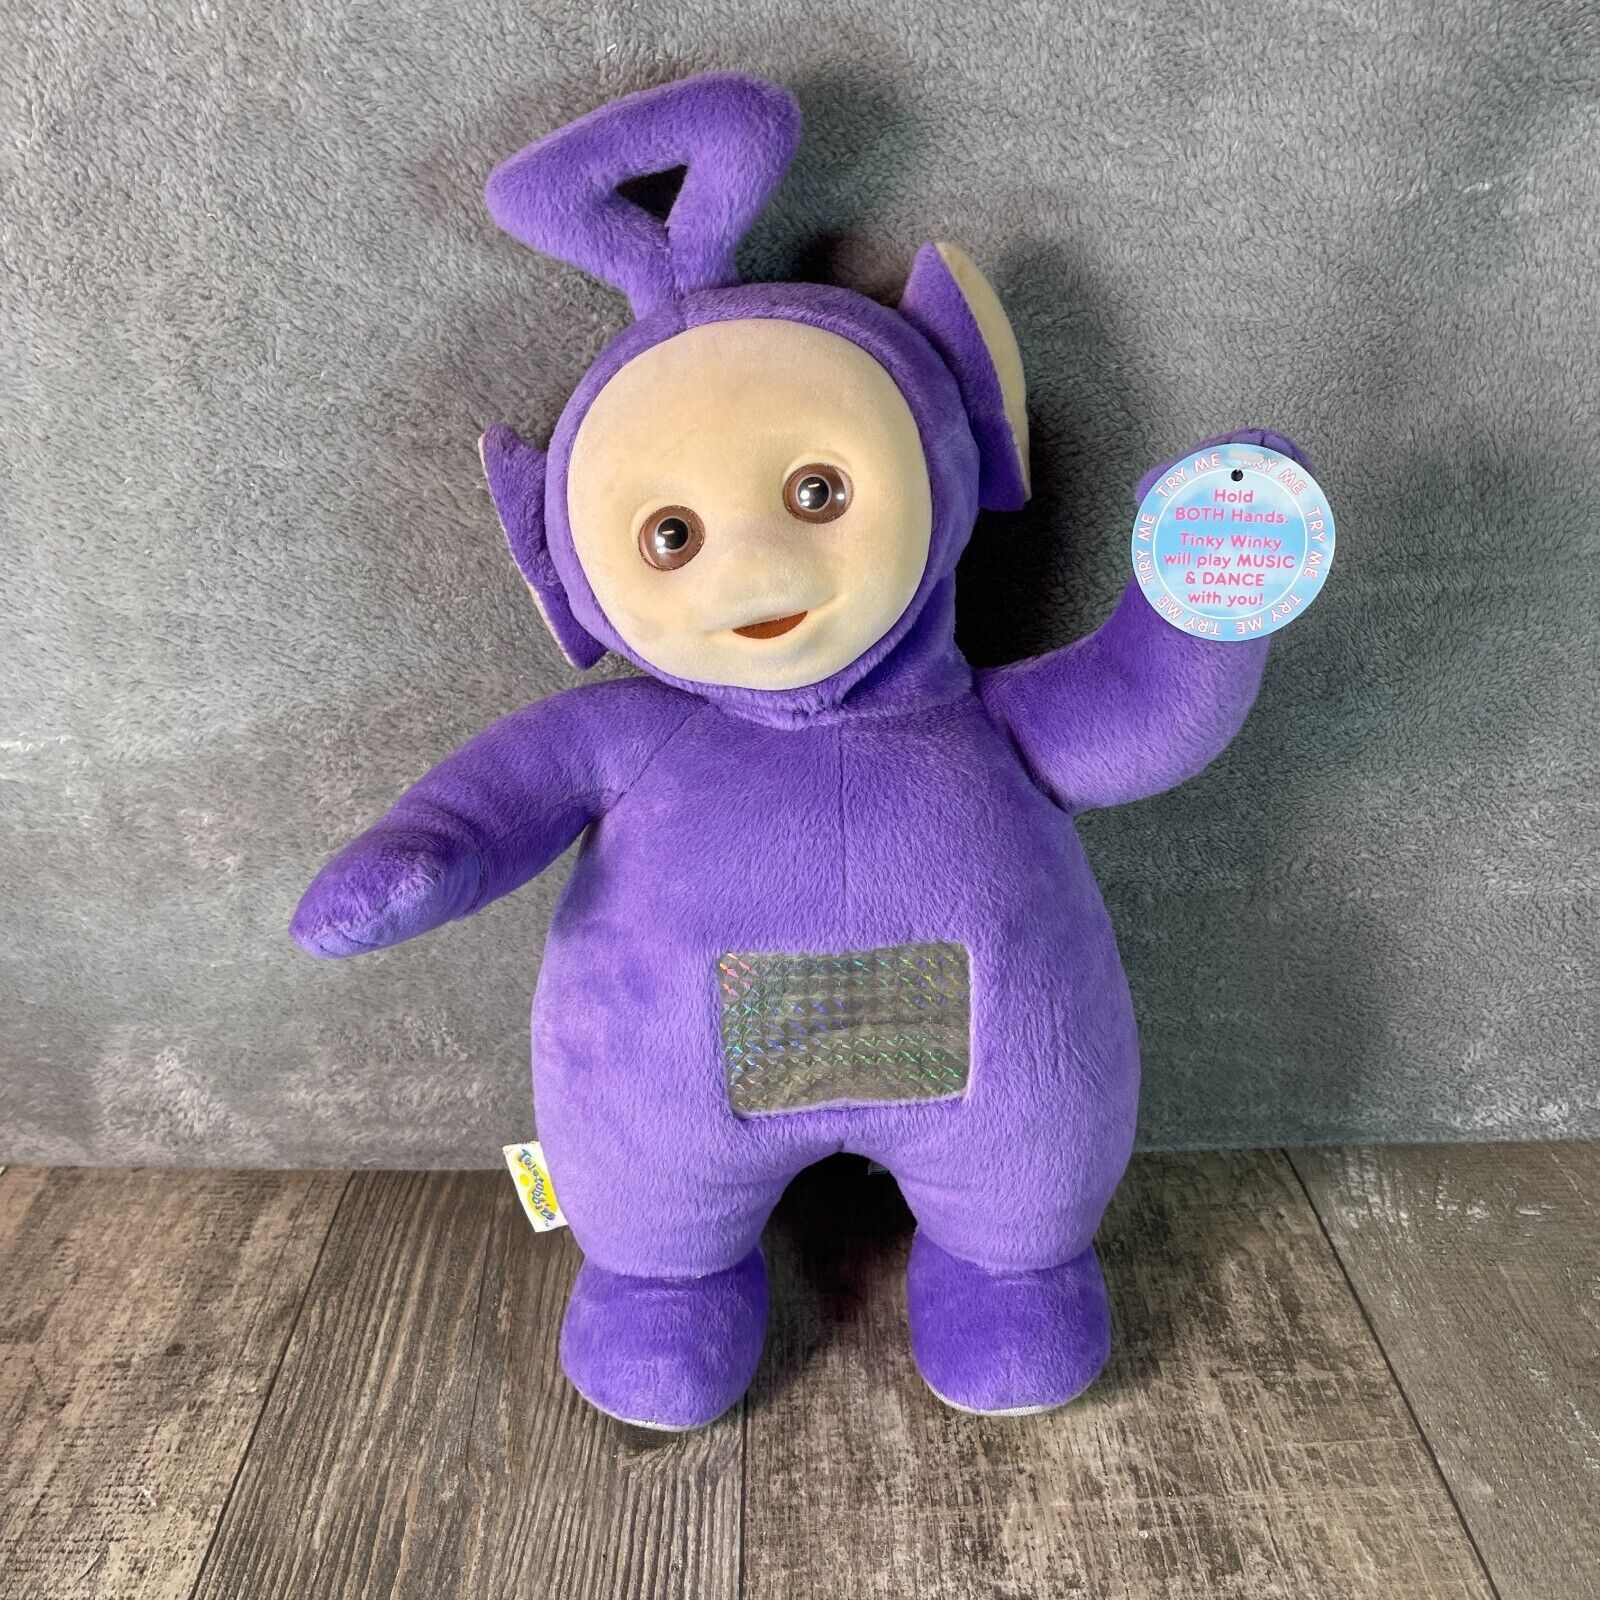 Vintage Teletubbies Tinky Winky Dancing Musical Toy 15” 1999 Miss Battery Cover - $37.99